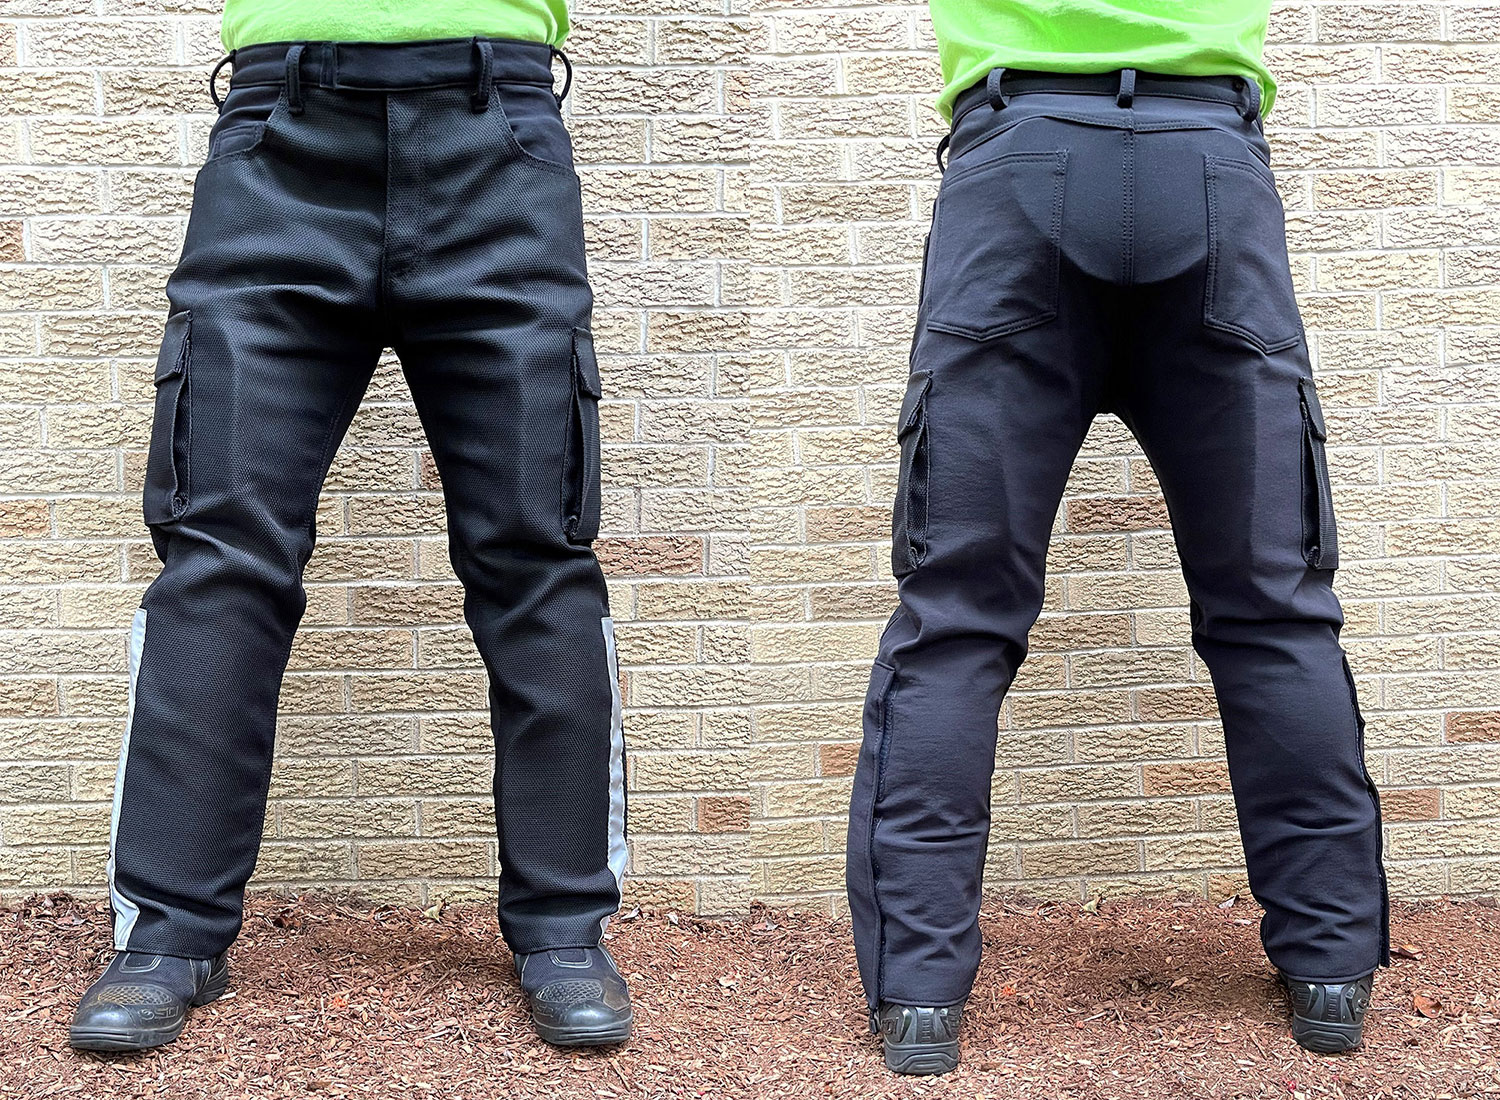 Adventure Motorcycle Cargo Pants (Reflective) - Rugged Motorbike Jeans